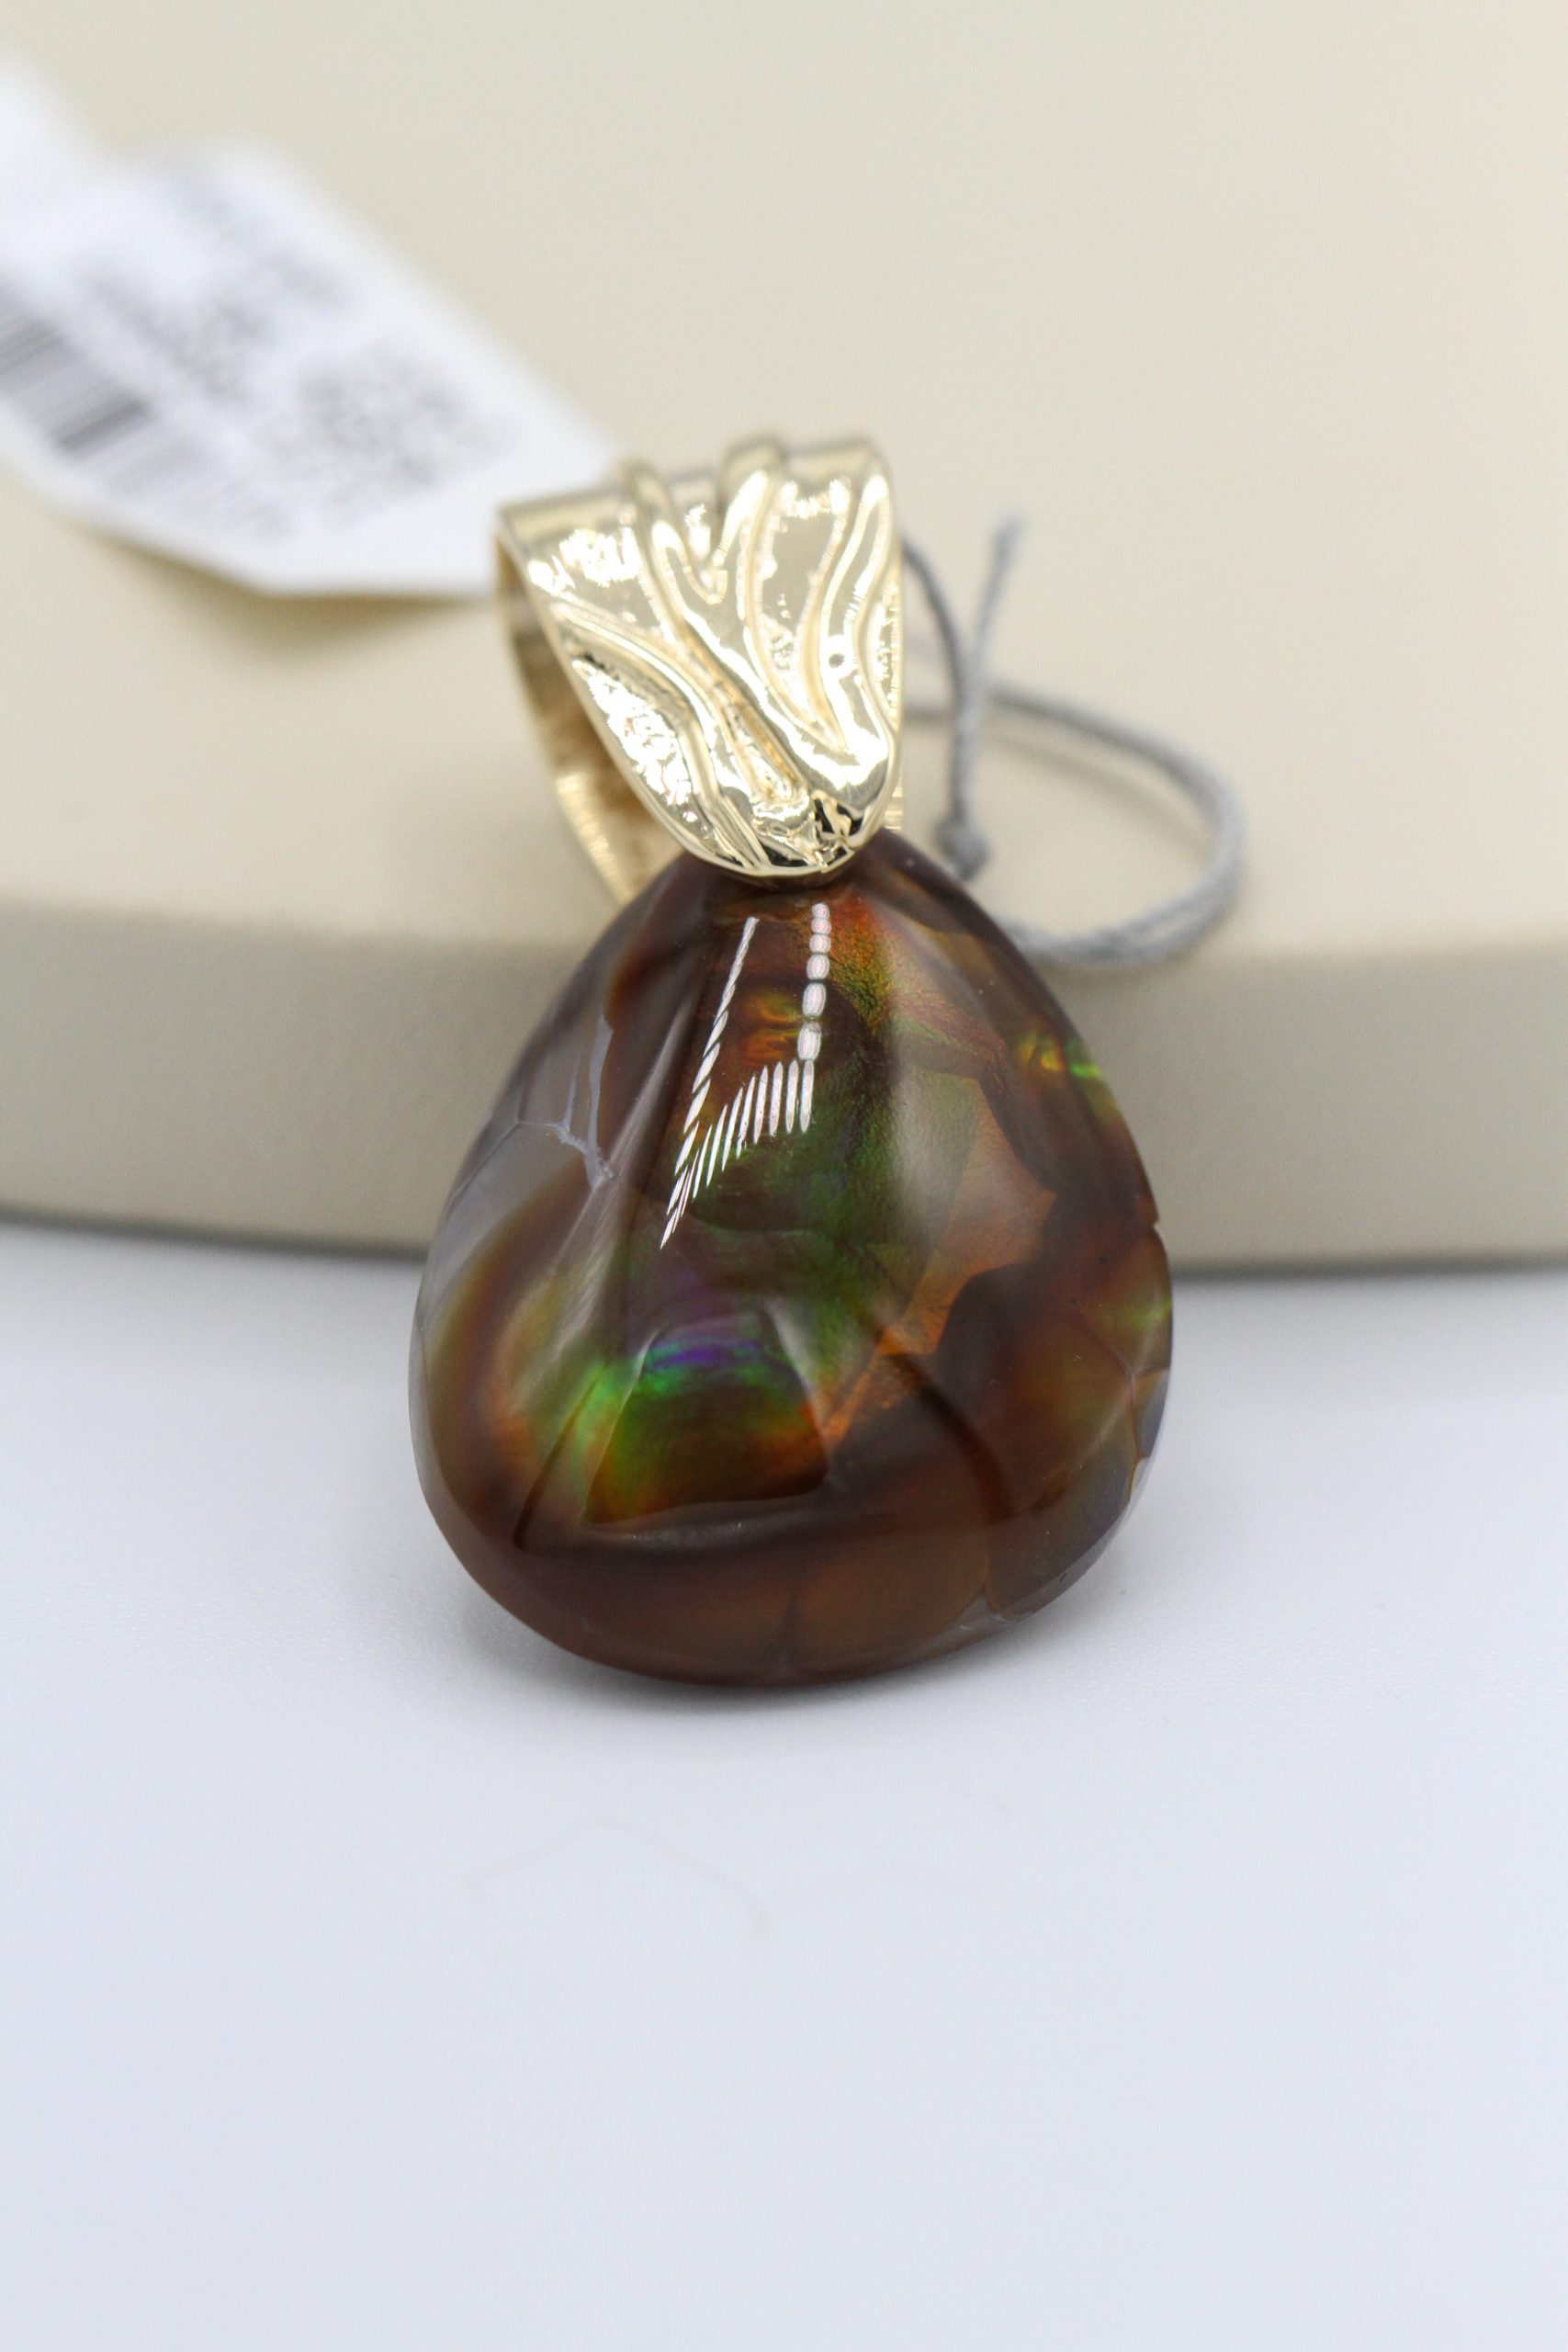 A gold earring with a large, dark gemstone